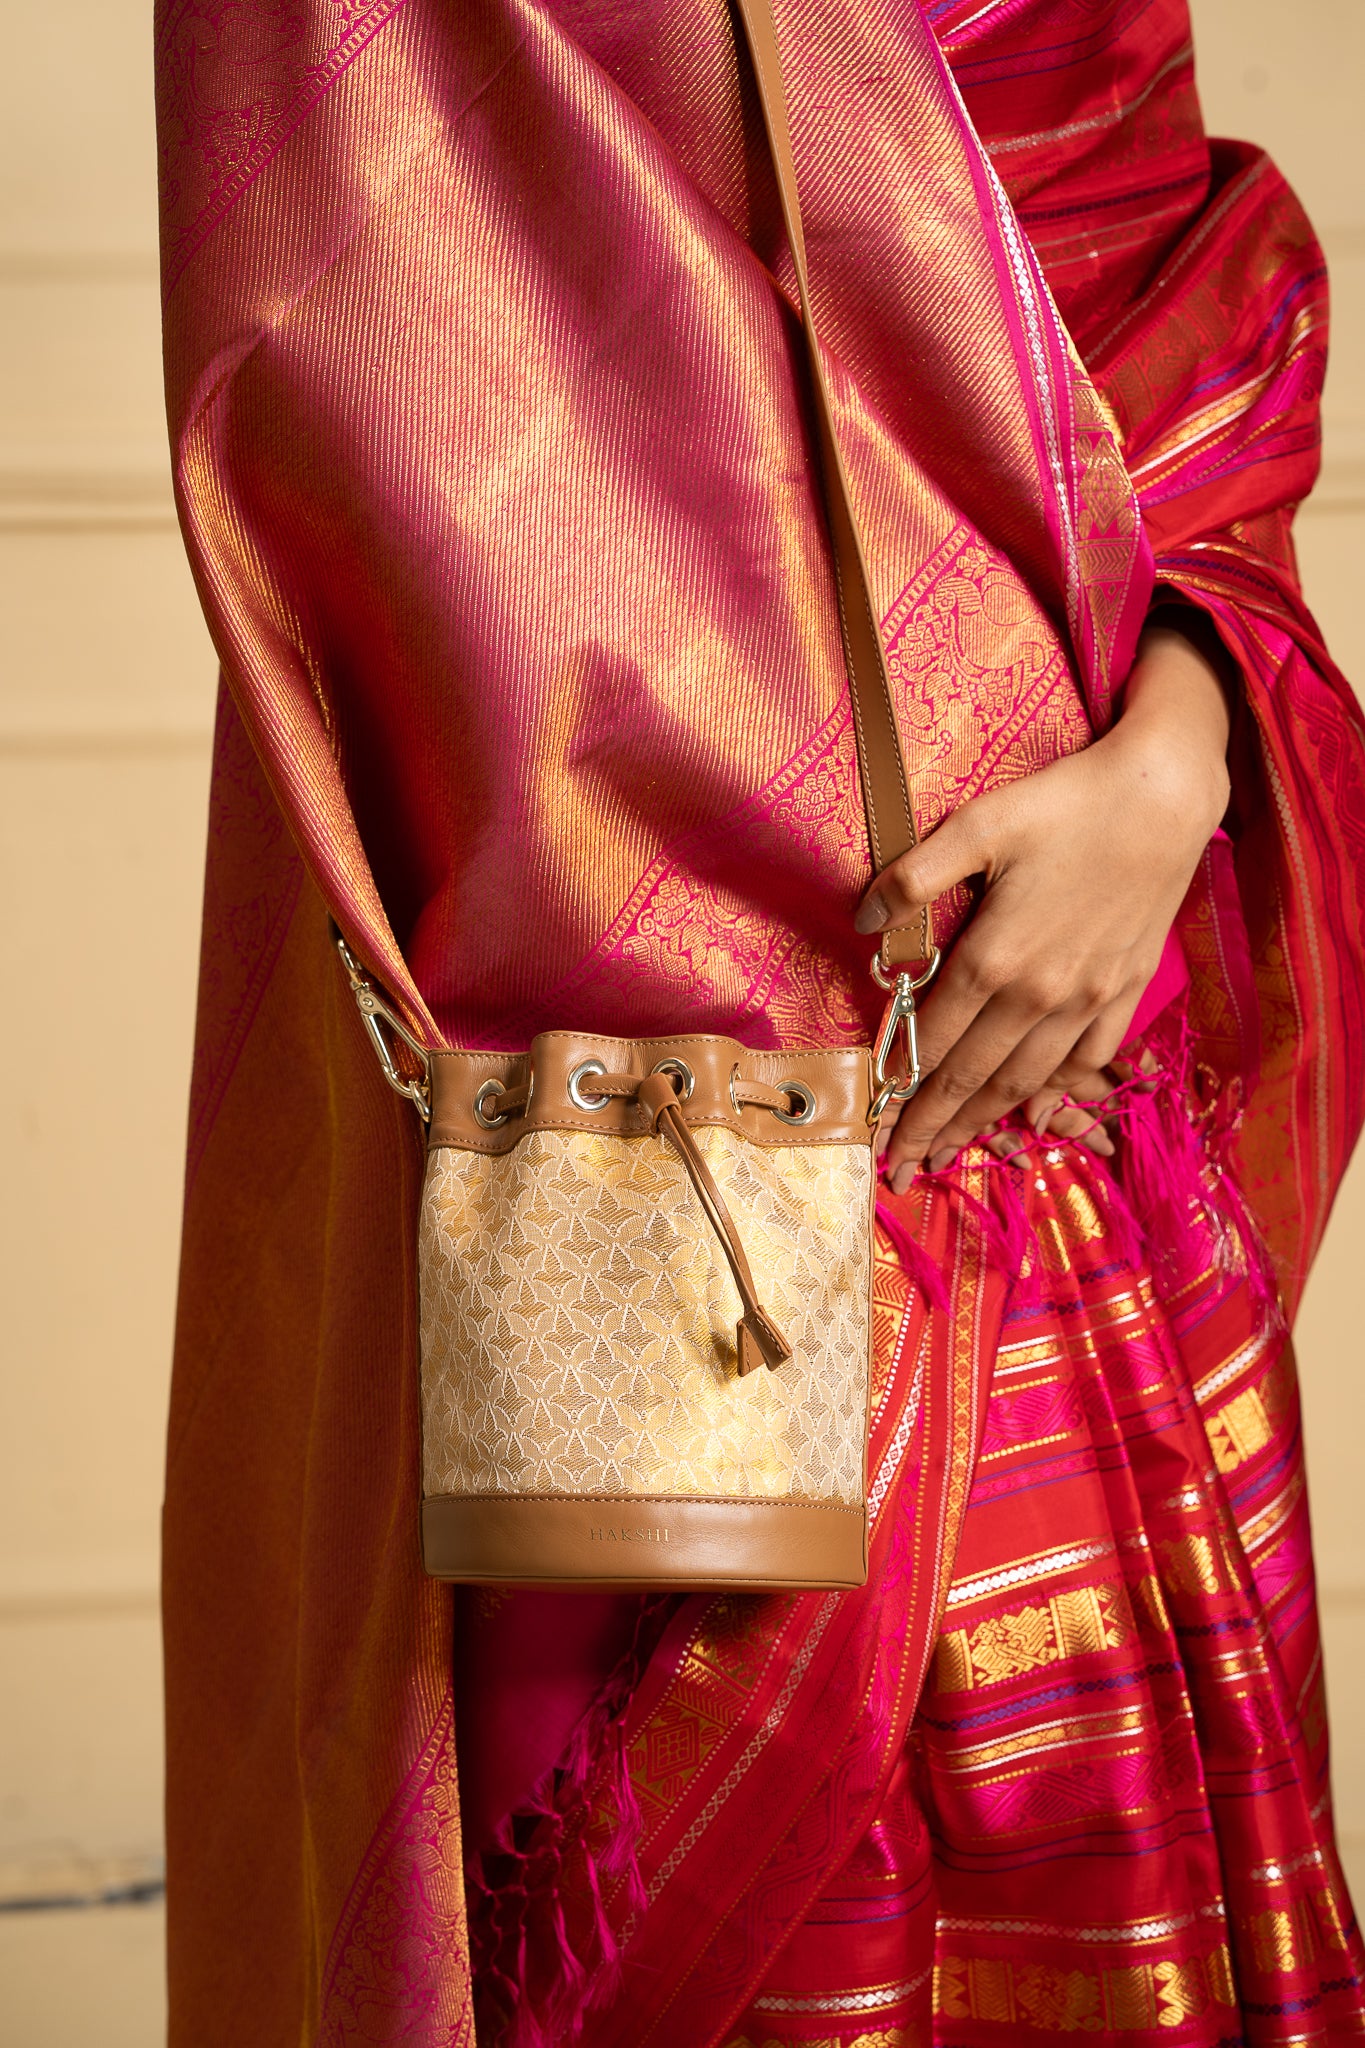 Genuine leather Kanchi Tissue Potli Bag featuring intricate weaving, a fusion of traditional craftsmanship and luxury material for a sophisticated accessory.